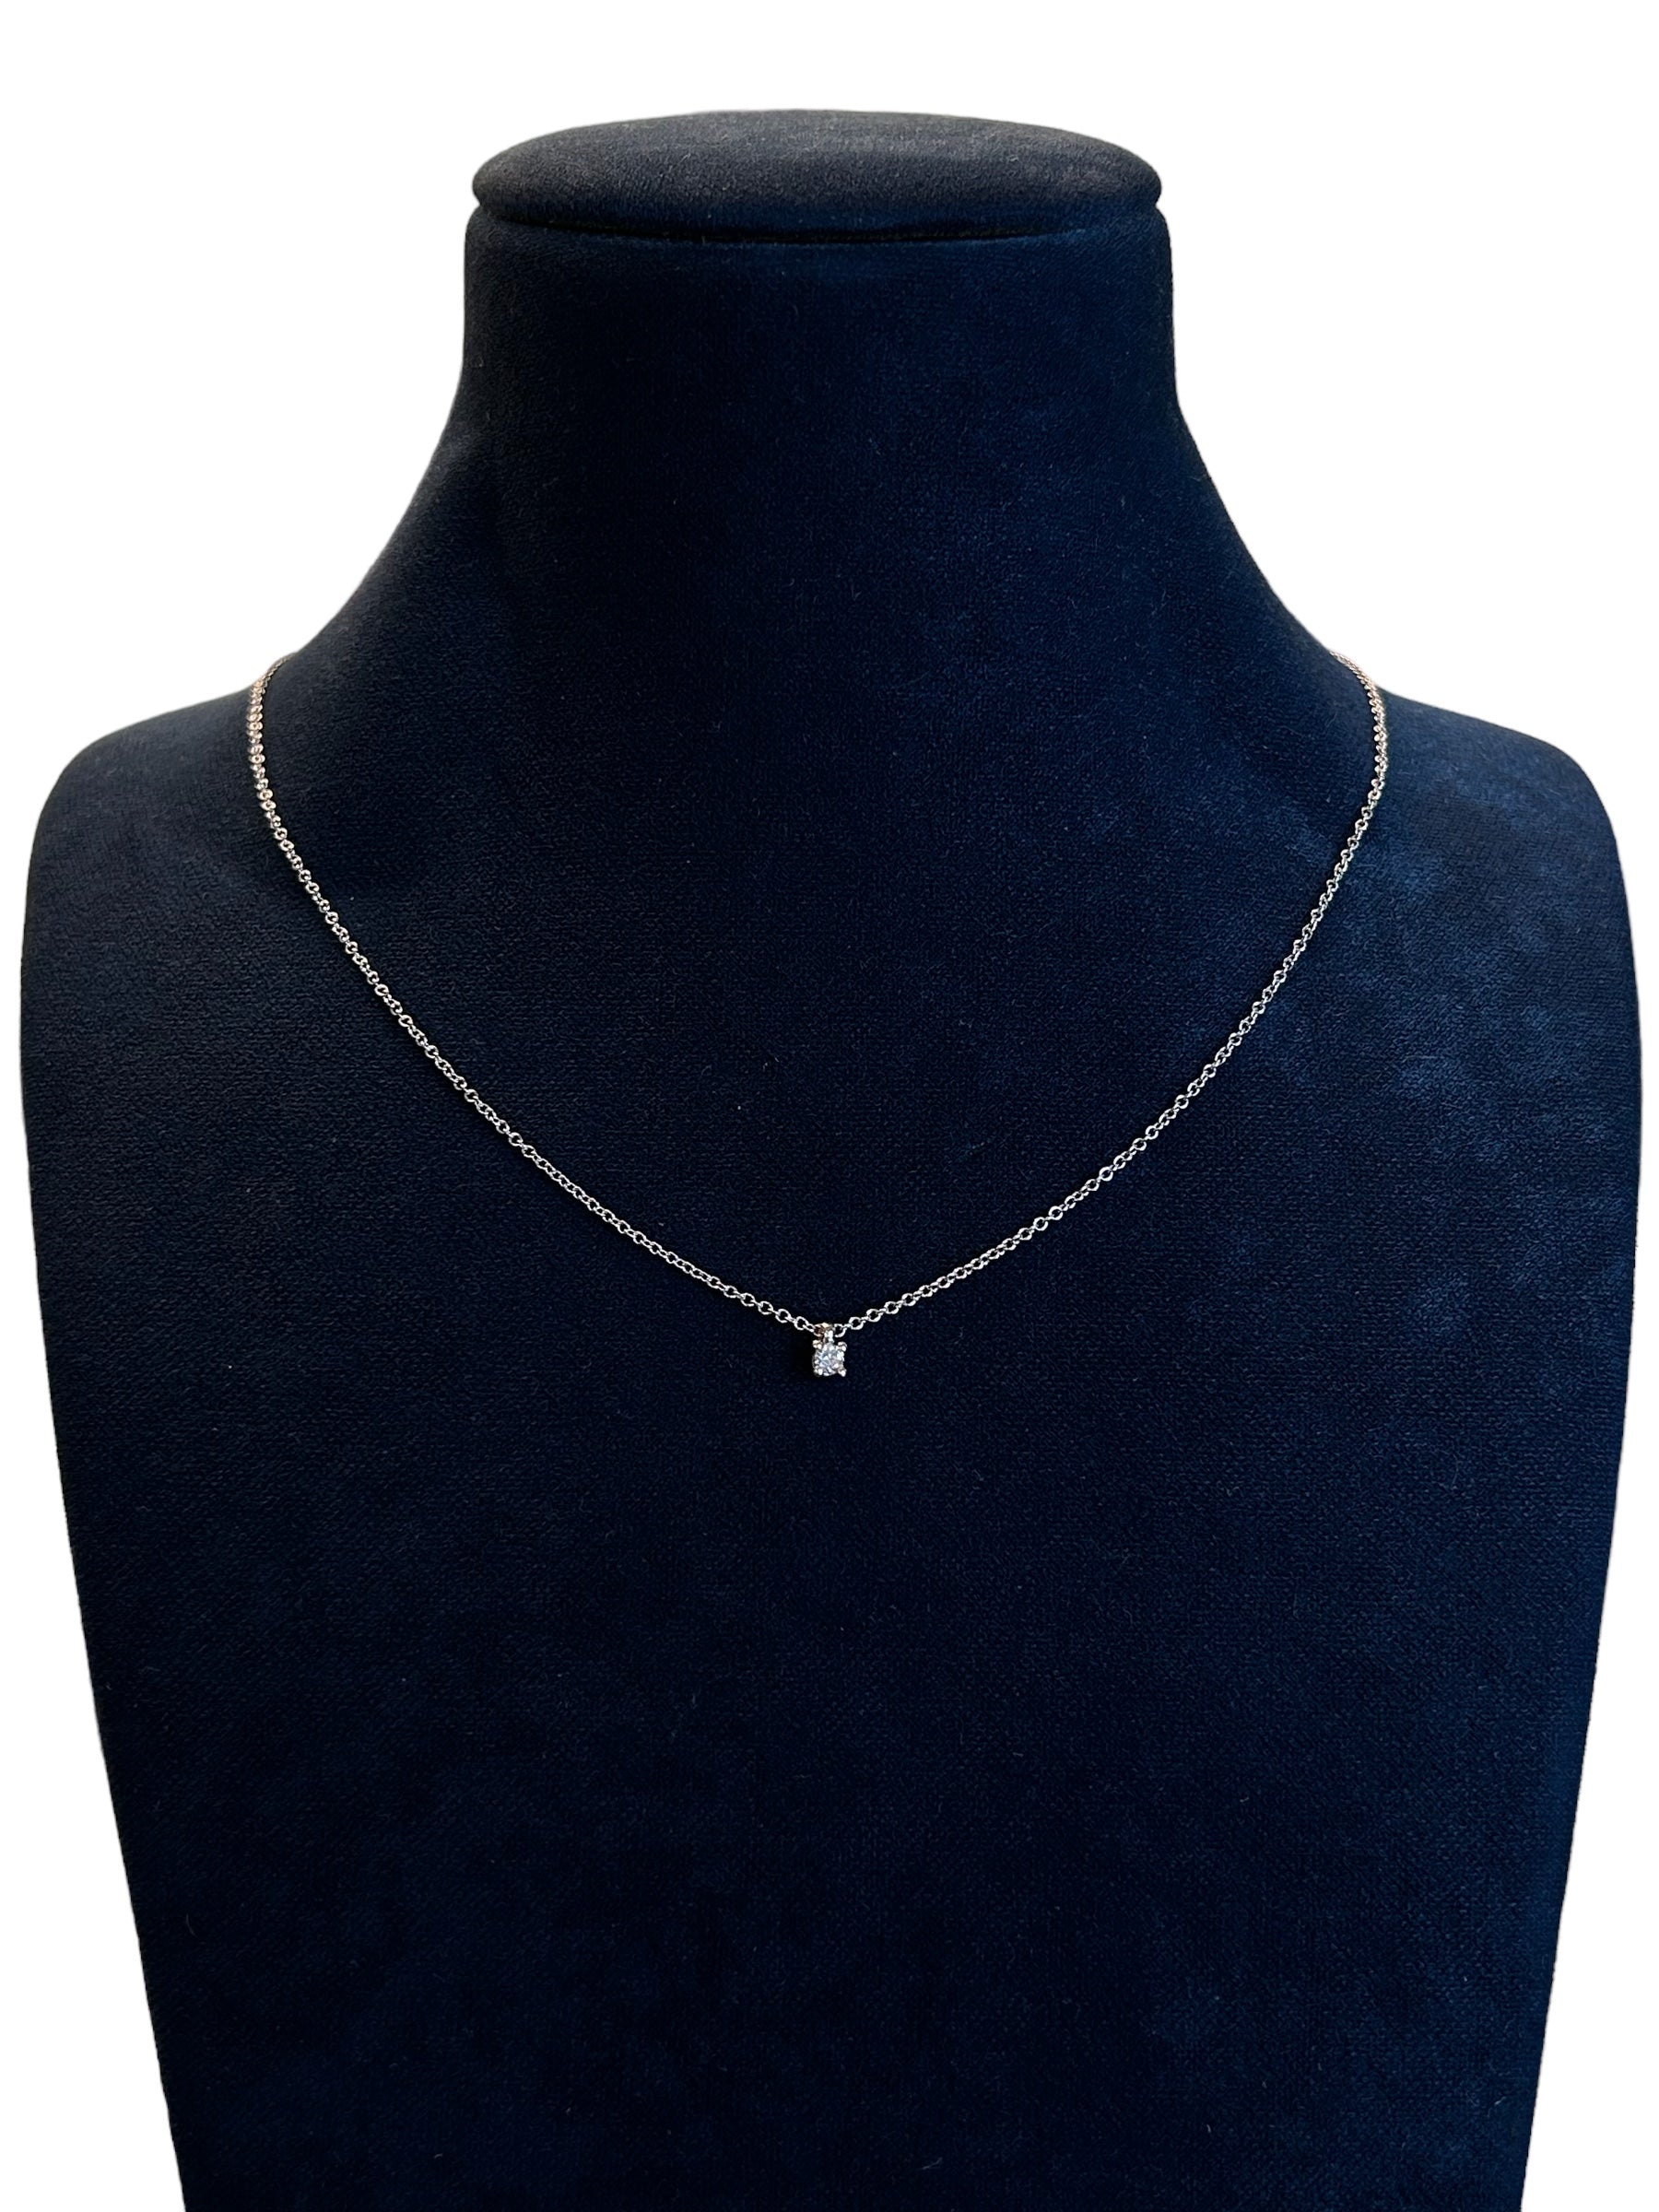 Light point necklace in white gold and diamonds, 0.05ct- 1127C00DW